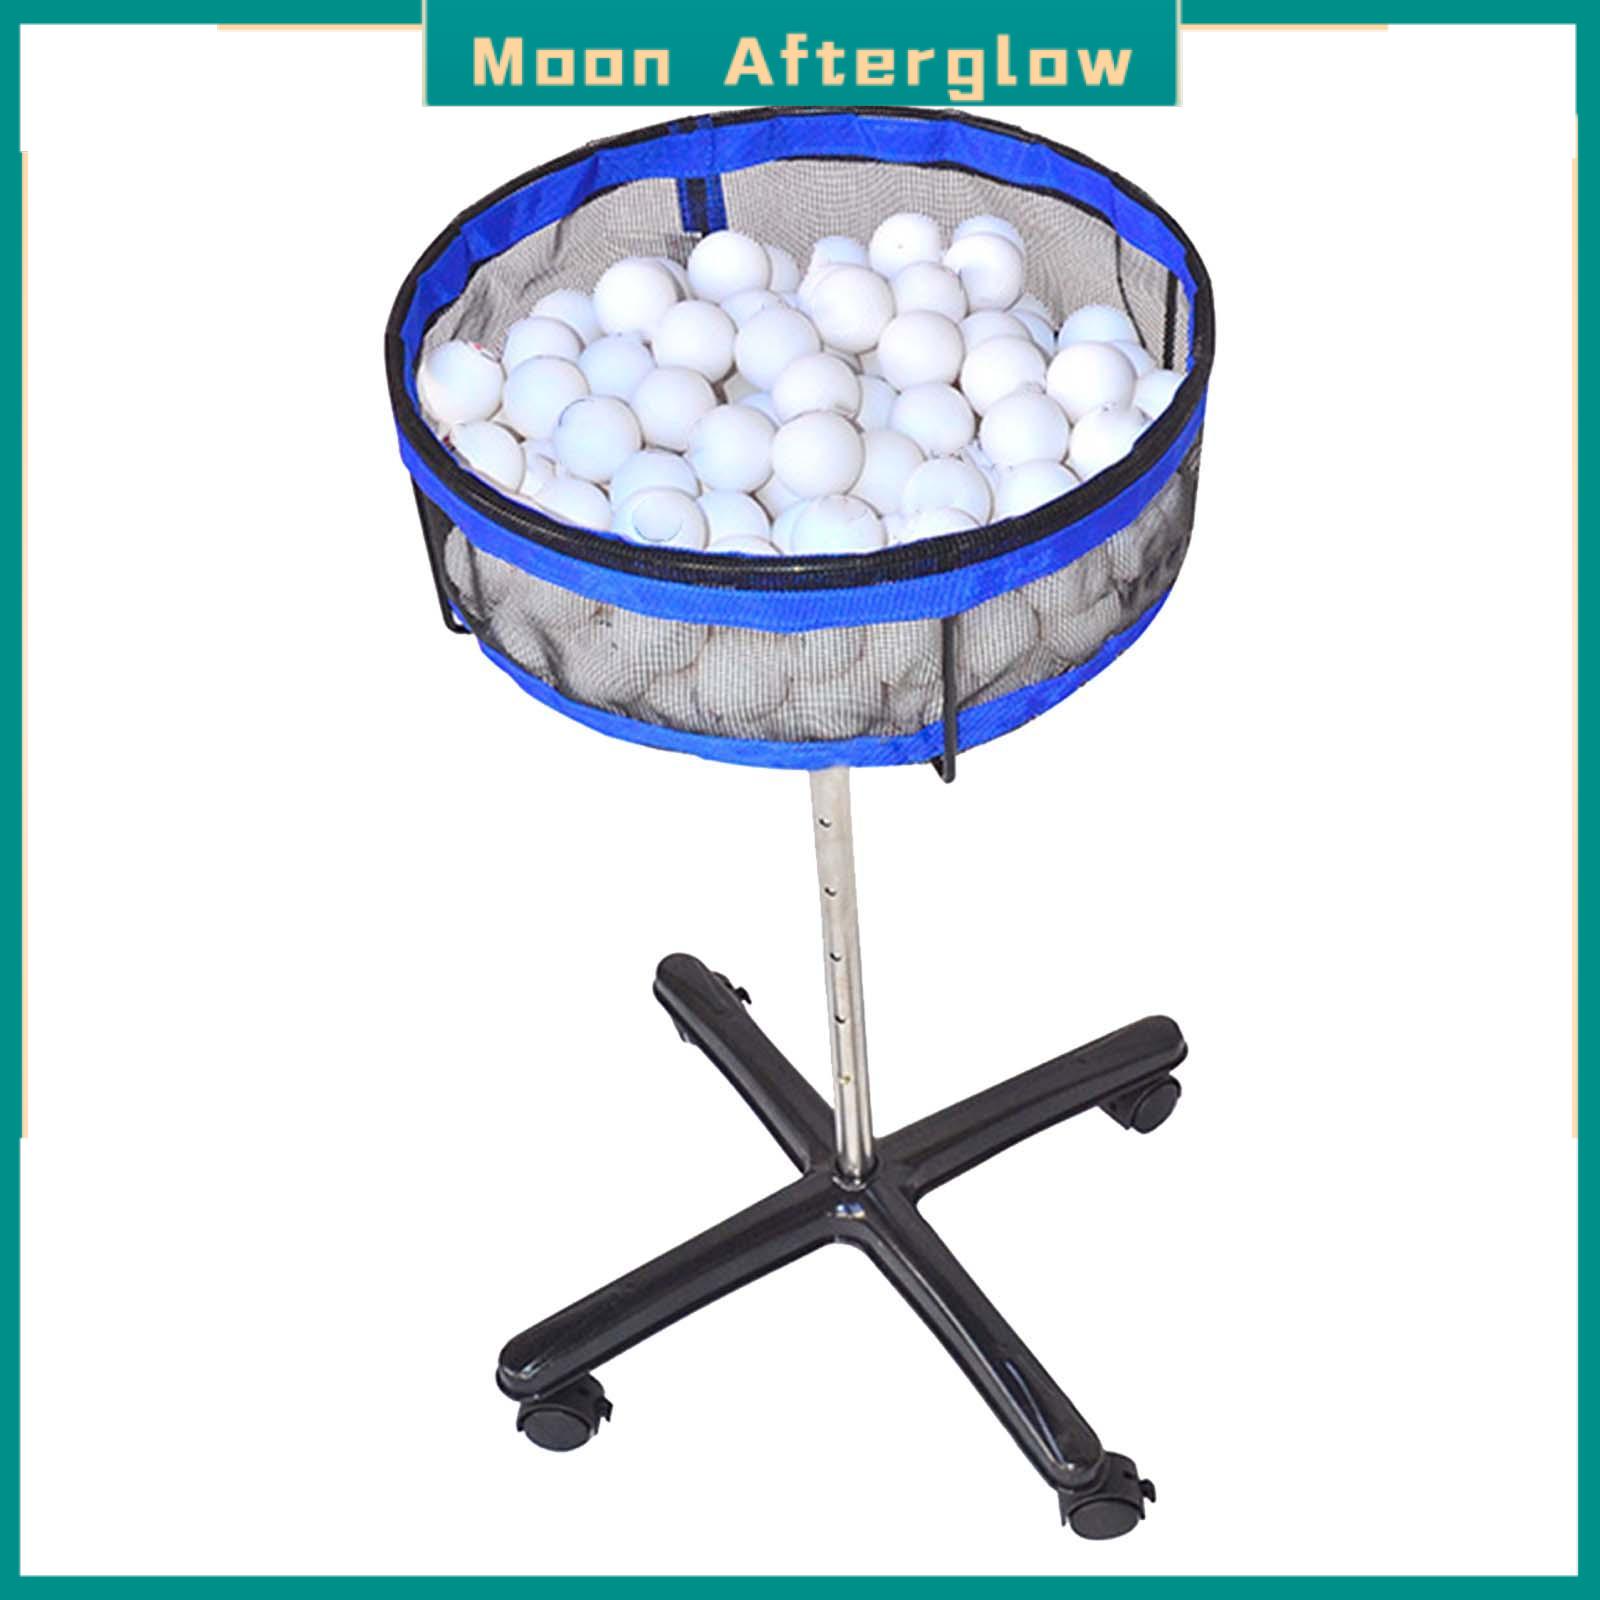 Moon Afterglow Ping Pong Ball Collector 23.62inch